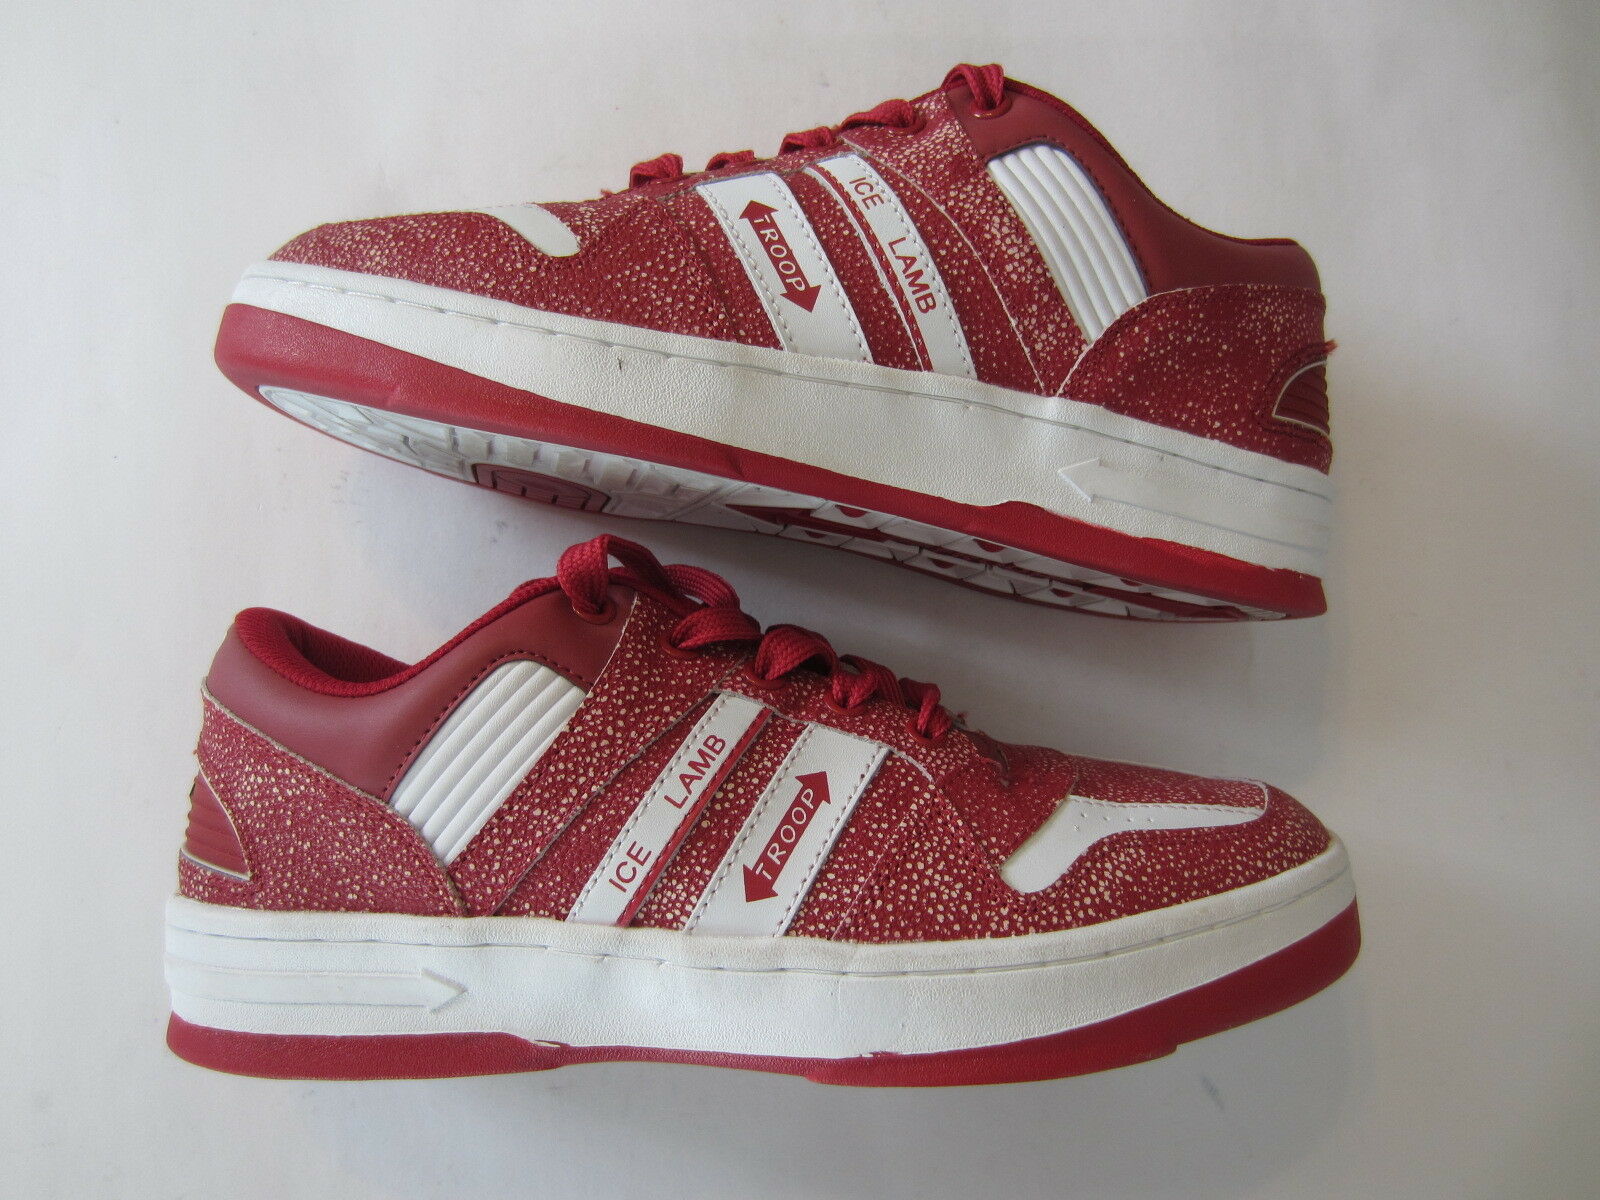 NEW Troop Ice Lamb ruby red white men retro sneaker LL COOL J shoe AUTHENTIC 9.5